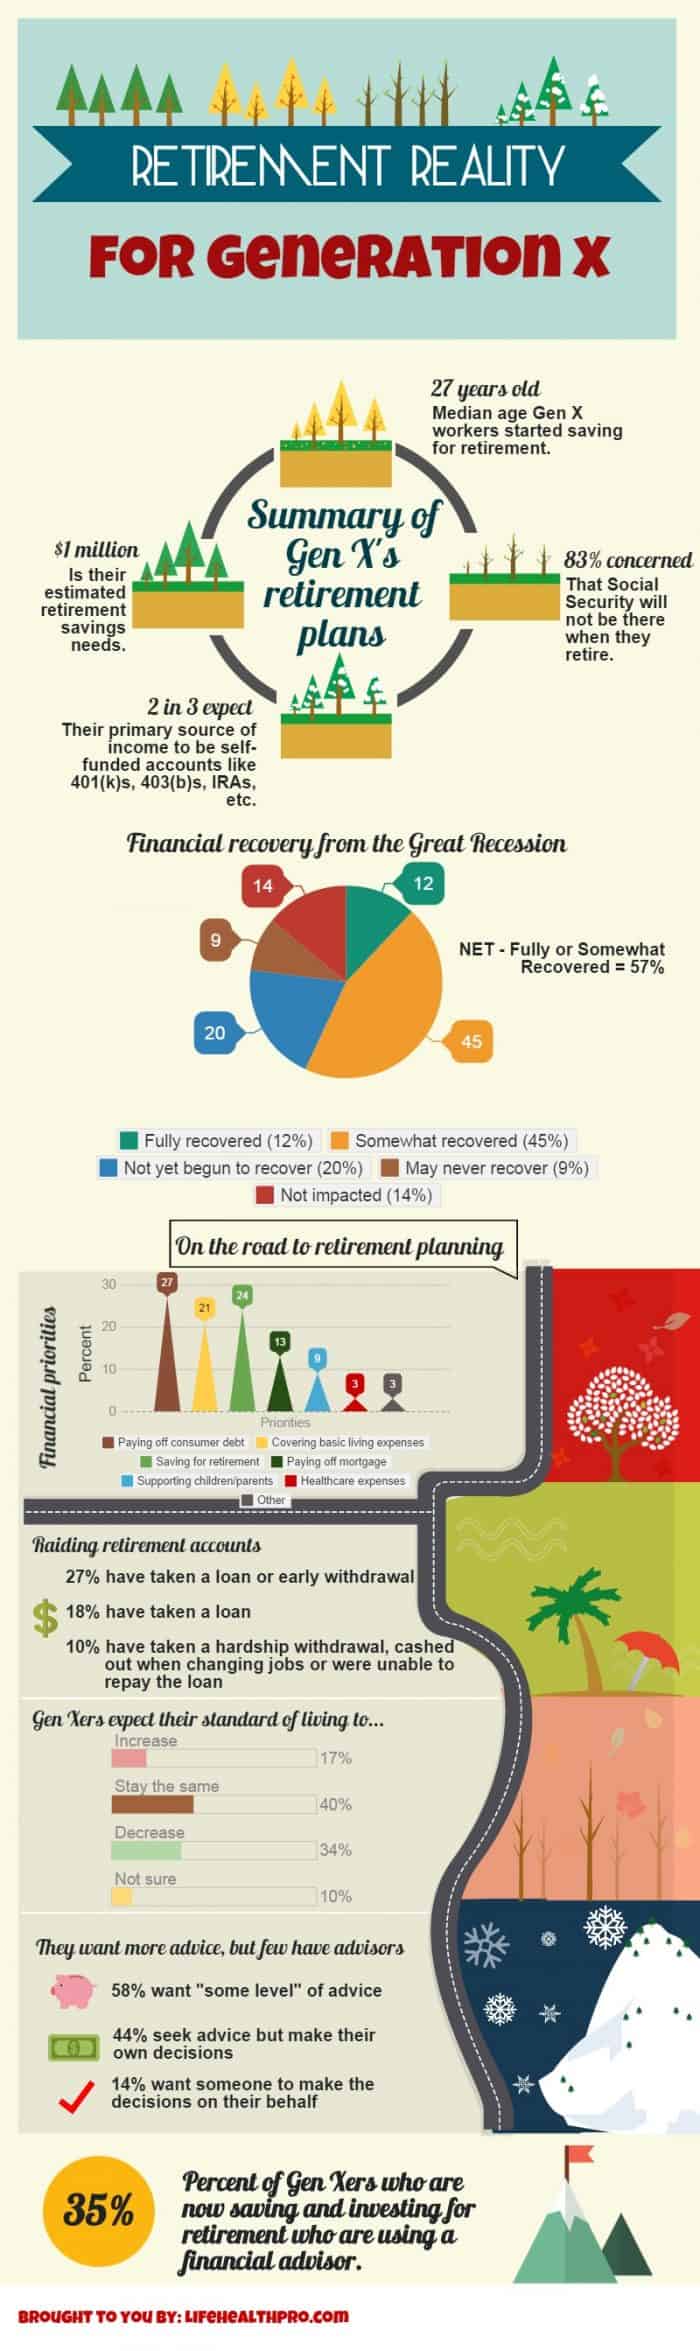 Retirement Reality For Generation X Infographic